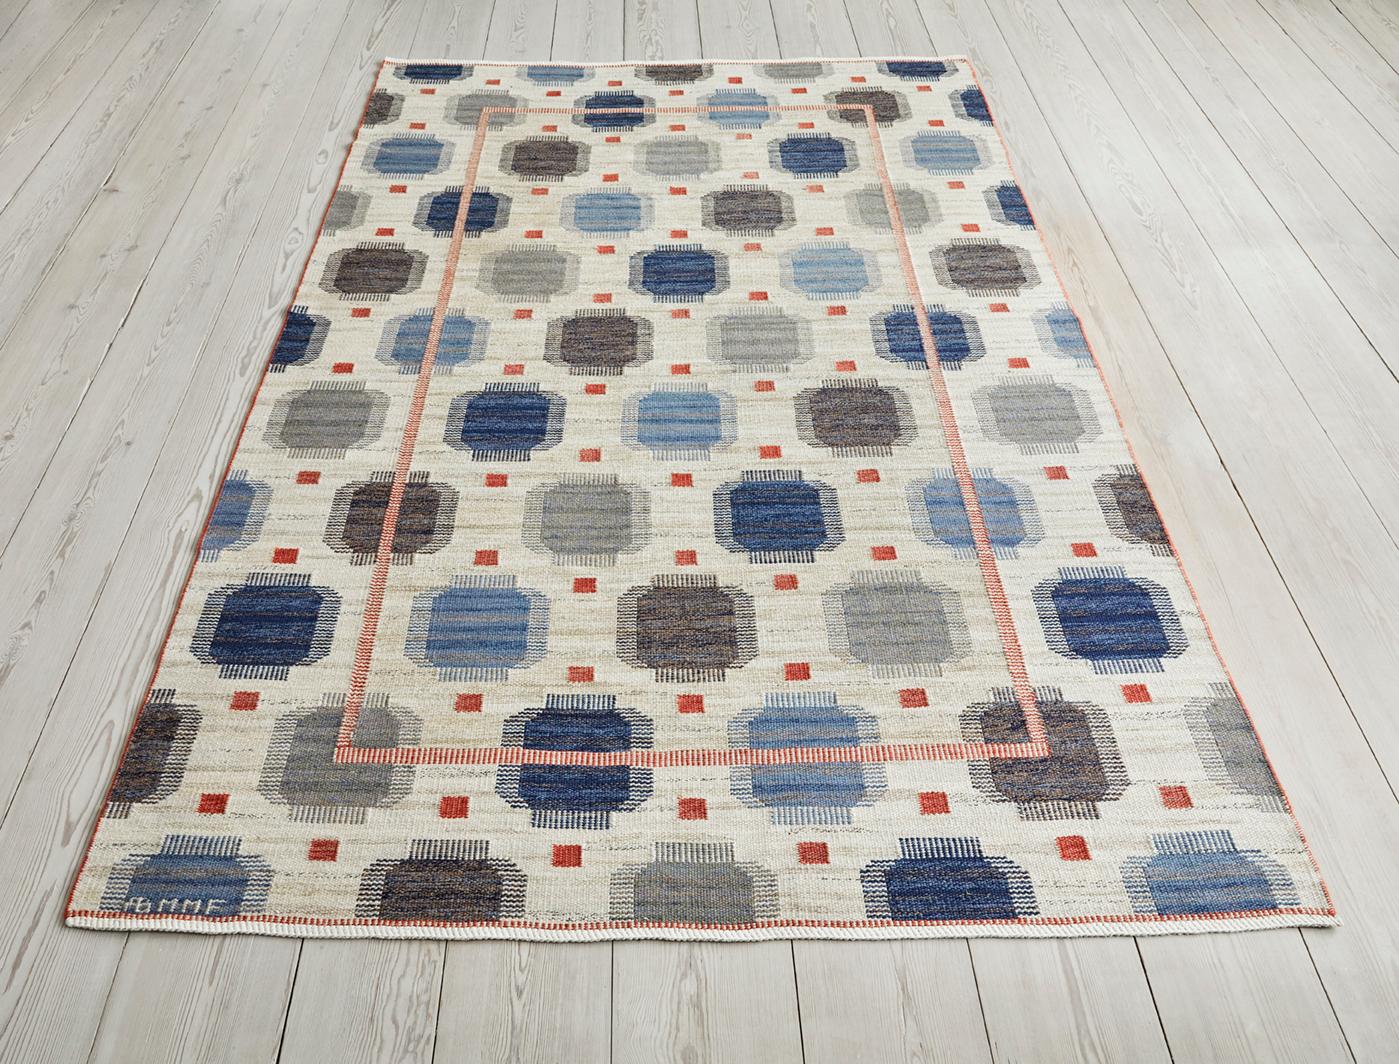 Märta Måås-Fjetterström
Sweden, 1937

“Blåplump” rug. Handwoven wool in cream with blue and red details. Designed in 1937. Handwoven at Märta Måås-Fjetterström AB, Båstad, Sweden.

Märta Måås-Fjetterström (1873-1941), considered to be Sweden’s